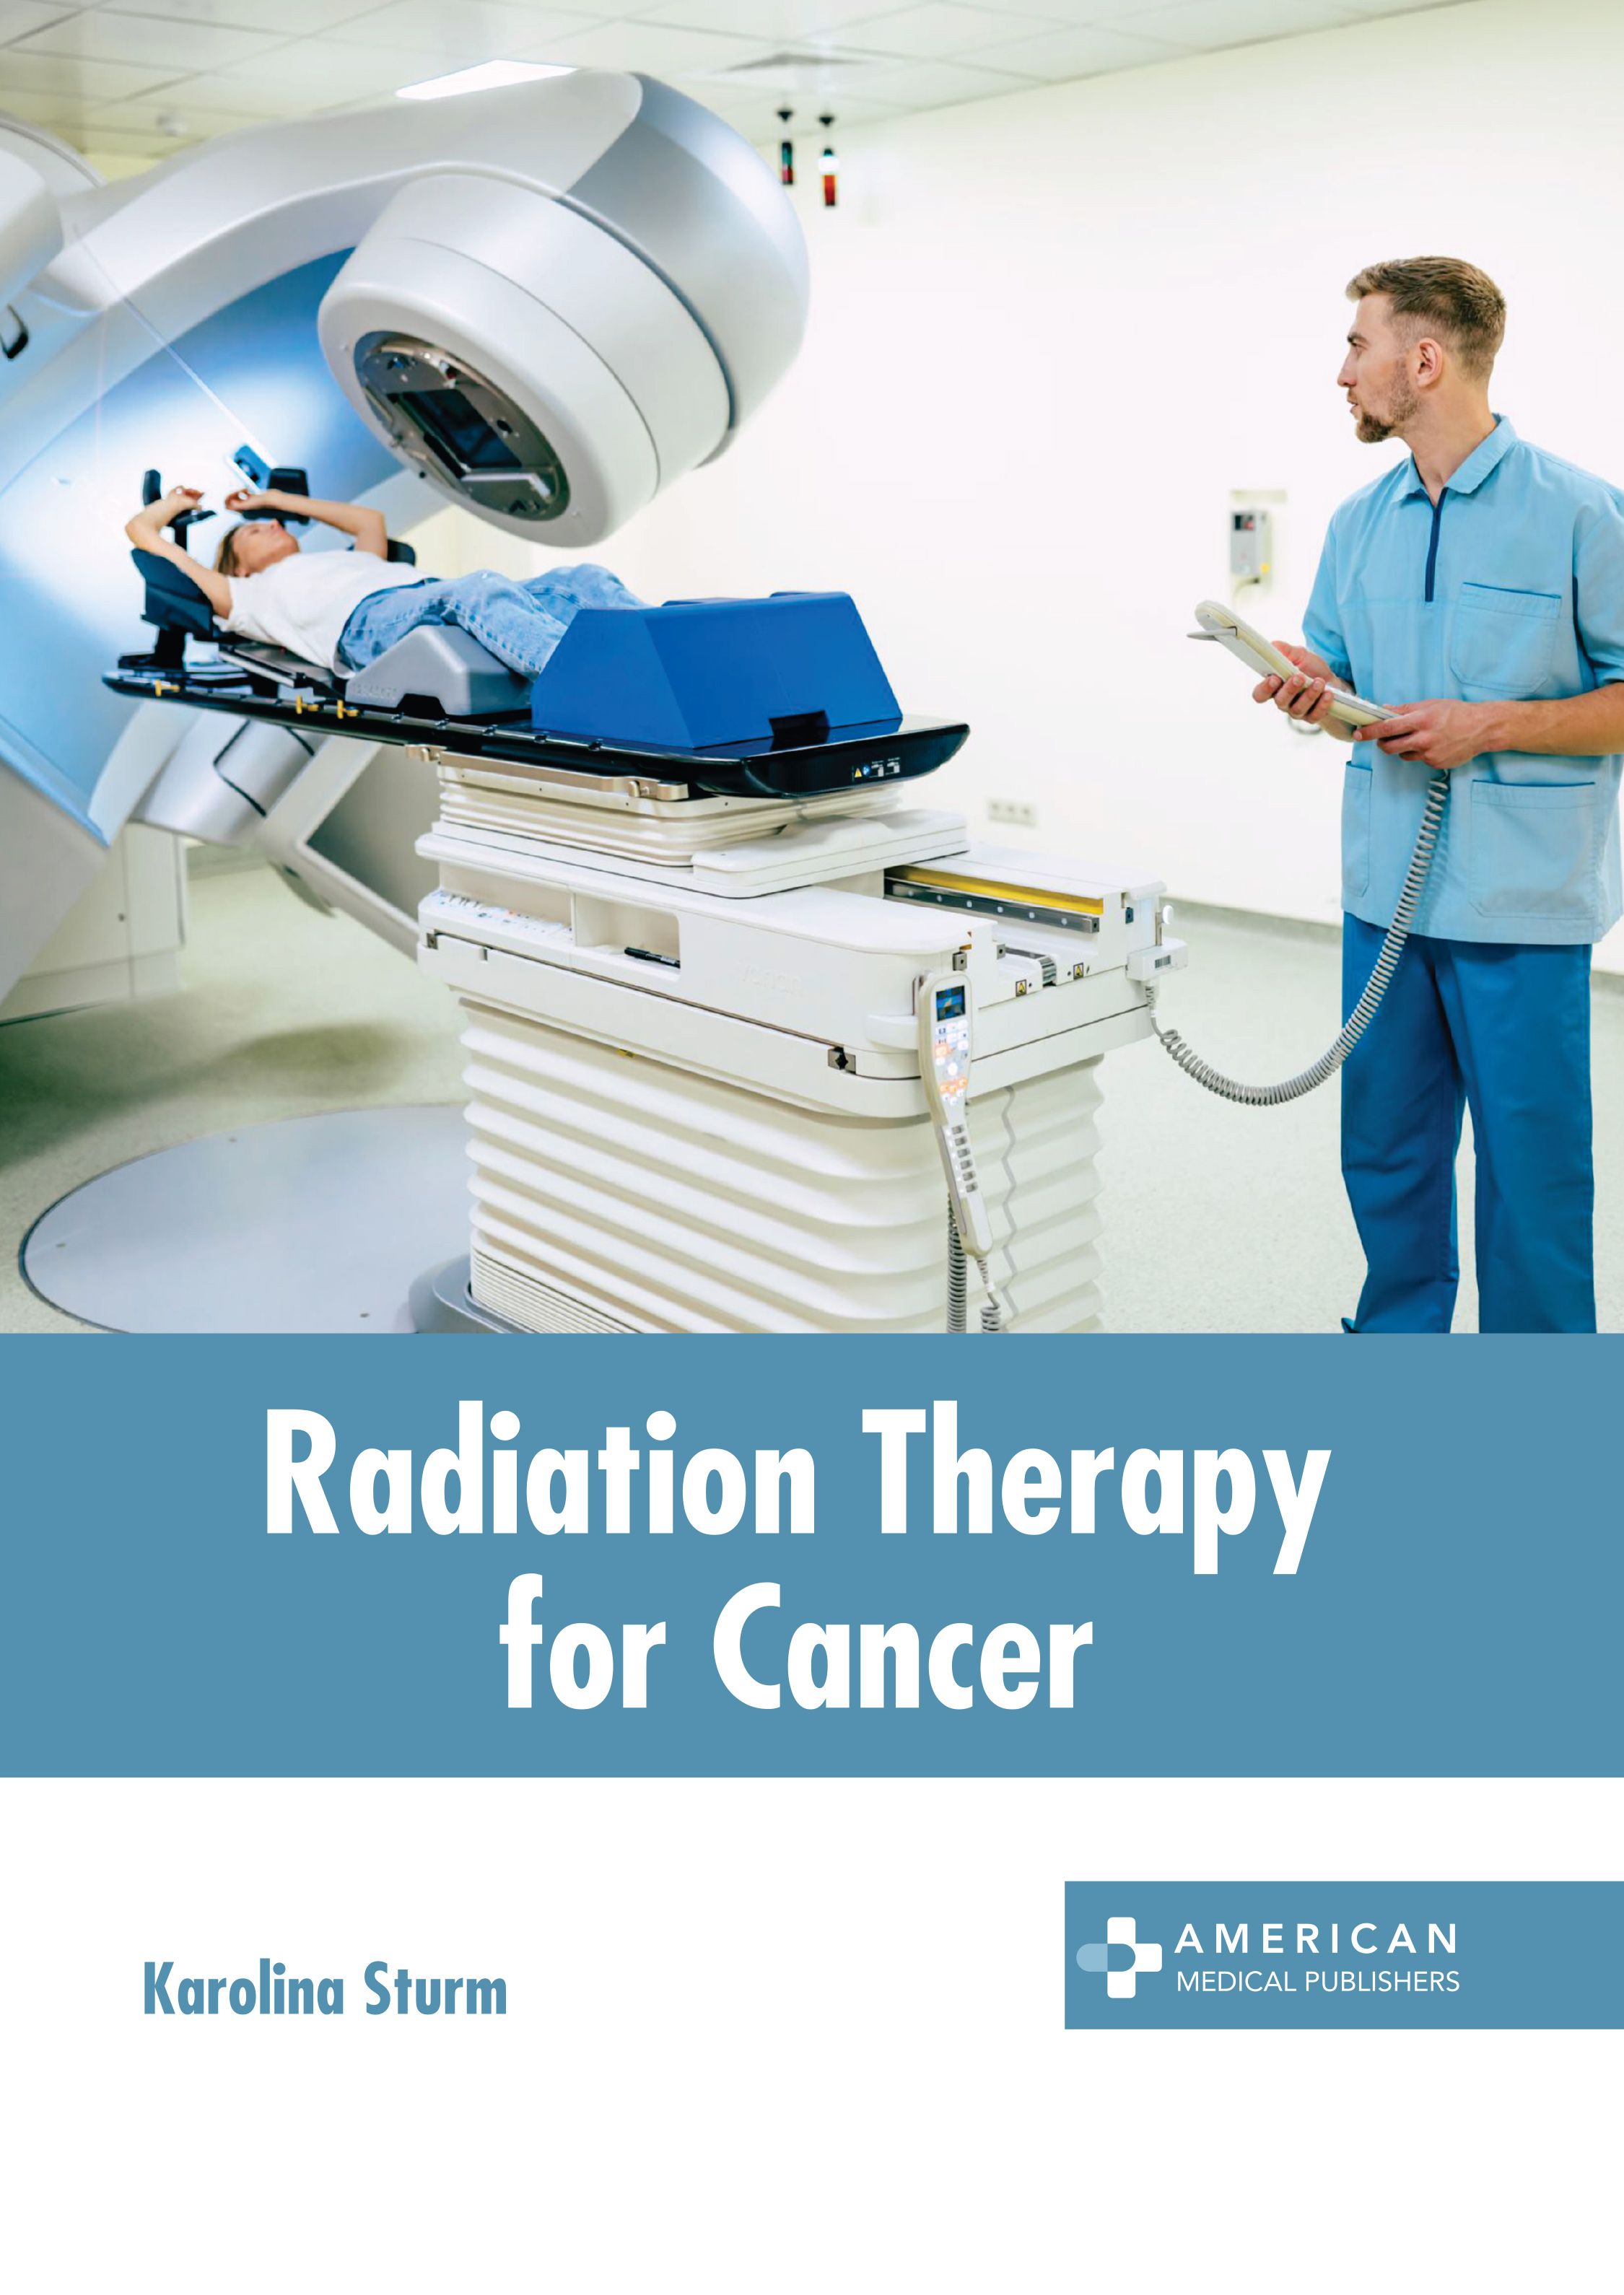 RADIATION THERAPY FOR CANCER